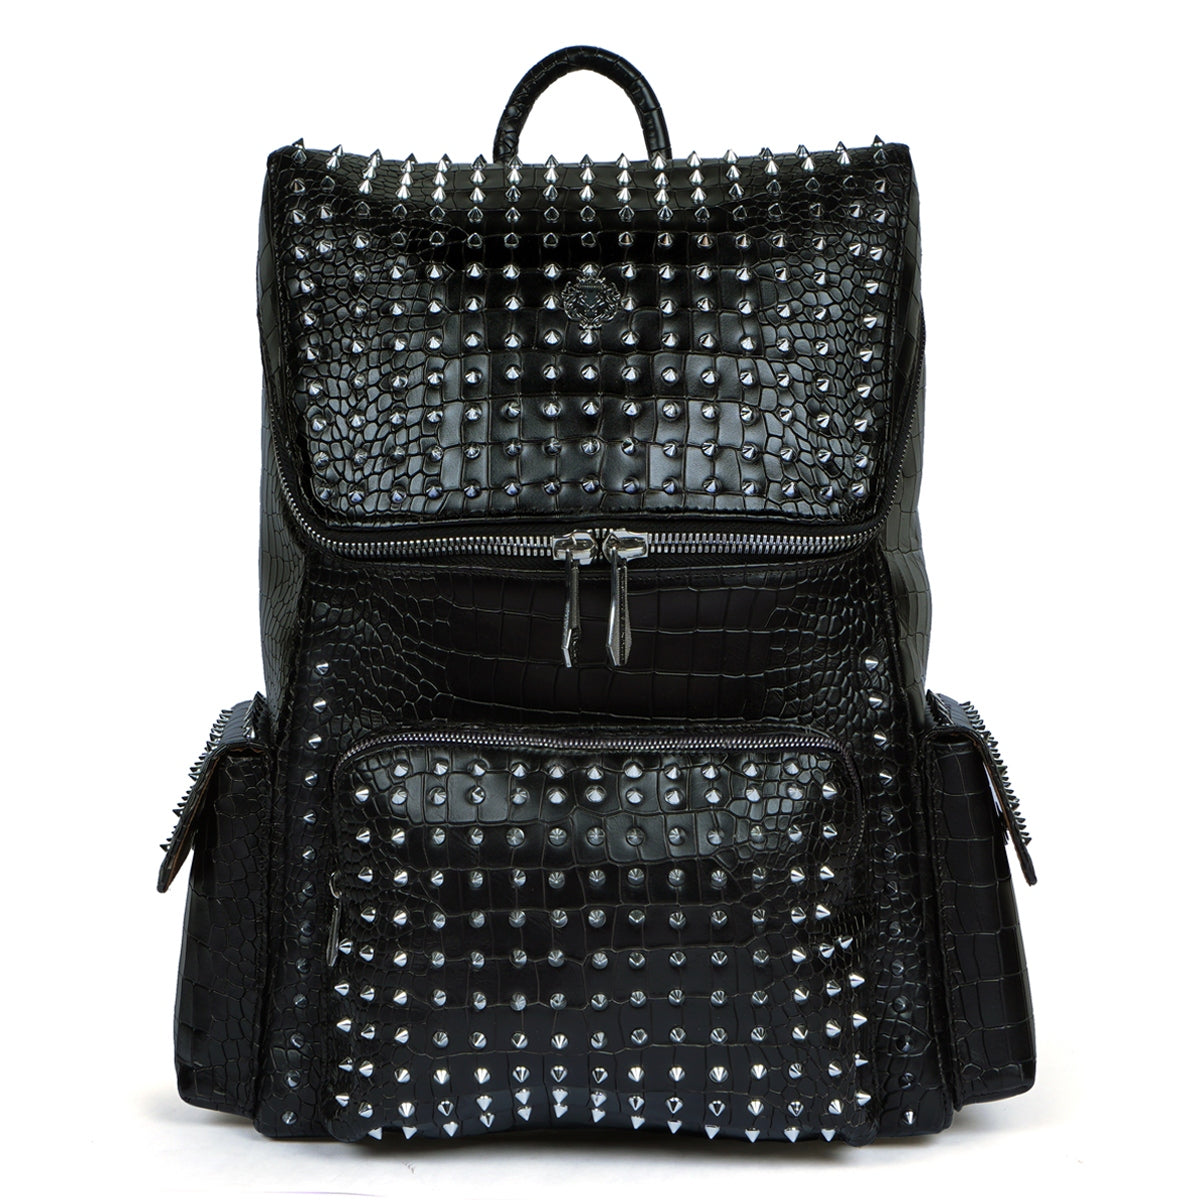 Top Opening Studded Backpack In Black Croco Textured Leather